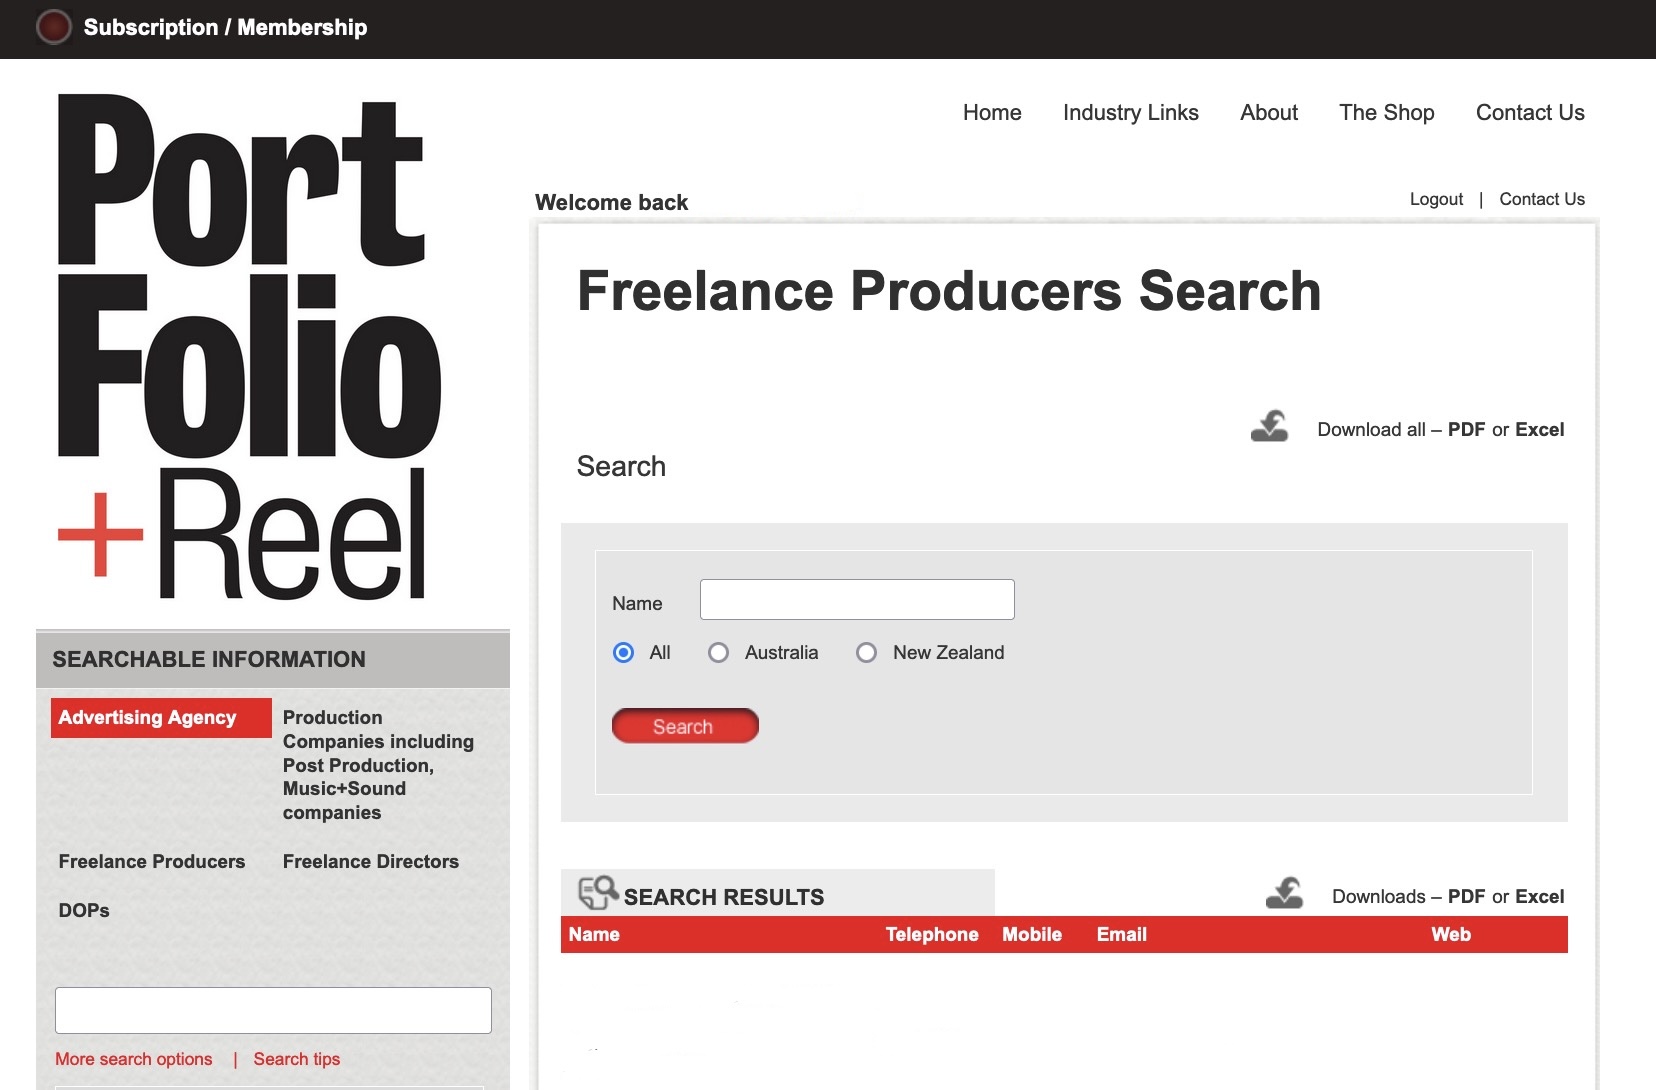 Attention freelance producers and directors: Get a FREE listing on Portfolio & Reel’s online directory